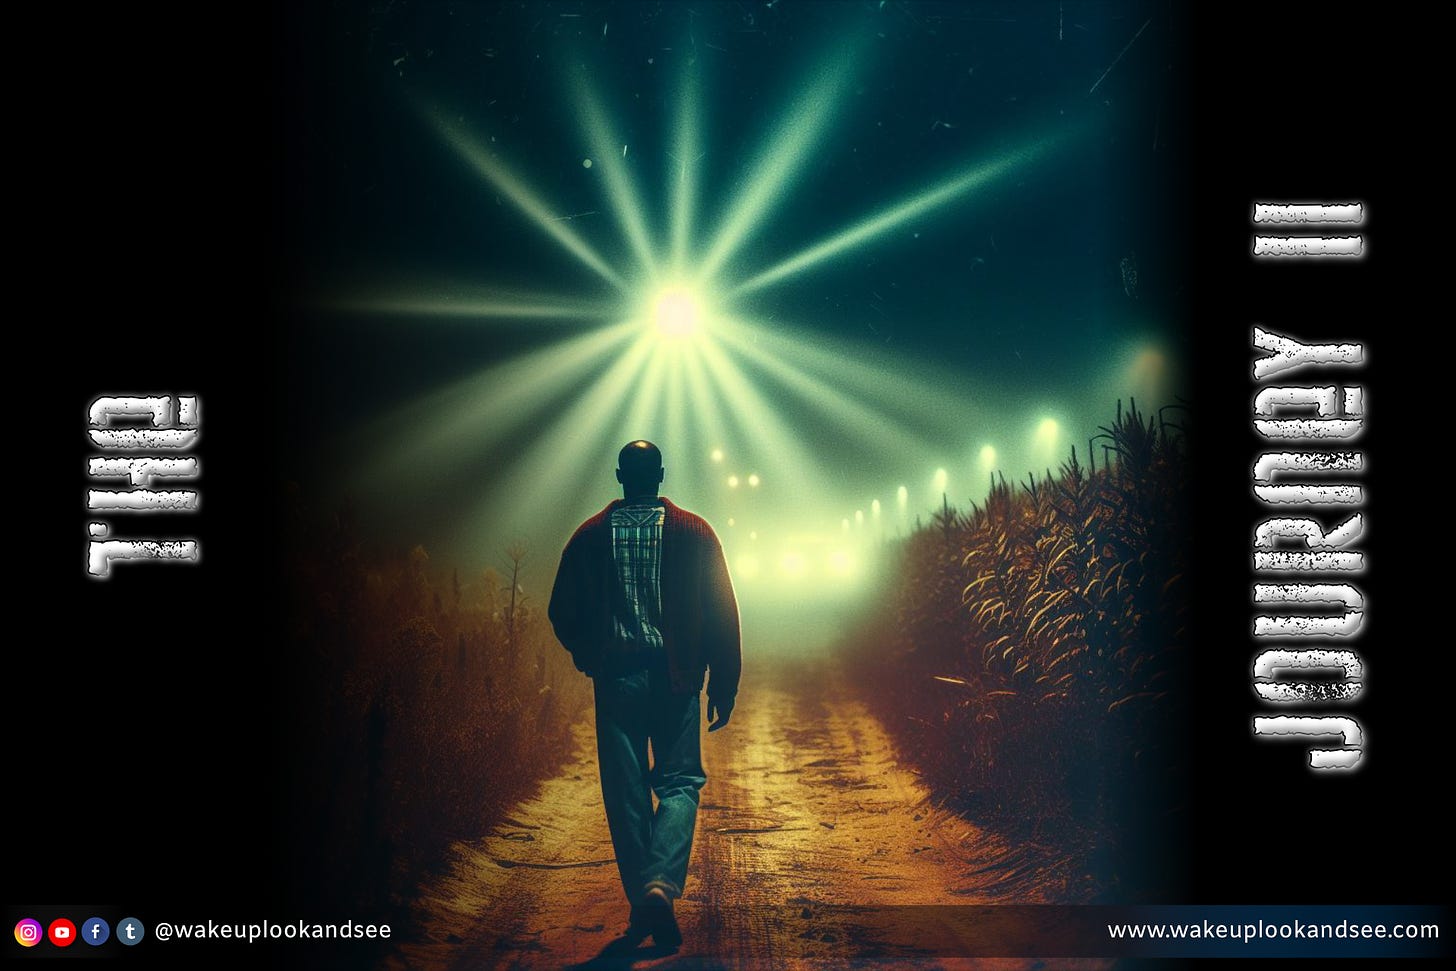 the journey 2 - A black man walking down a dirt road towards the light in the dead of night